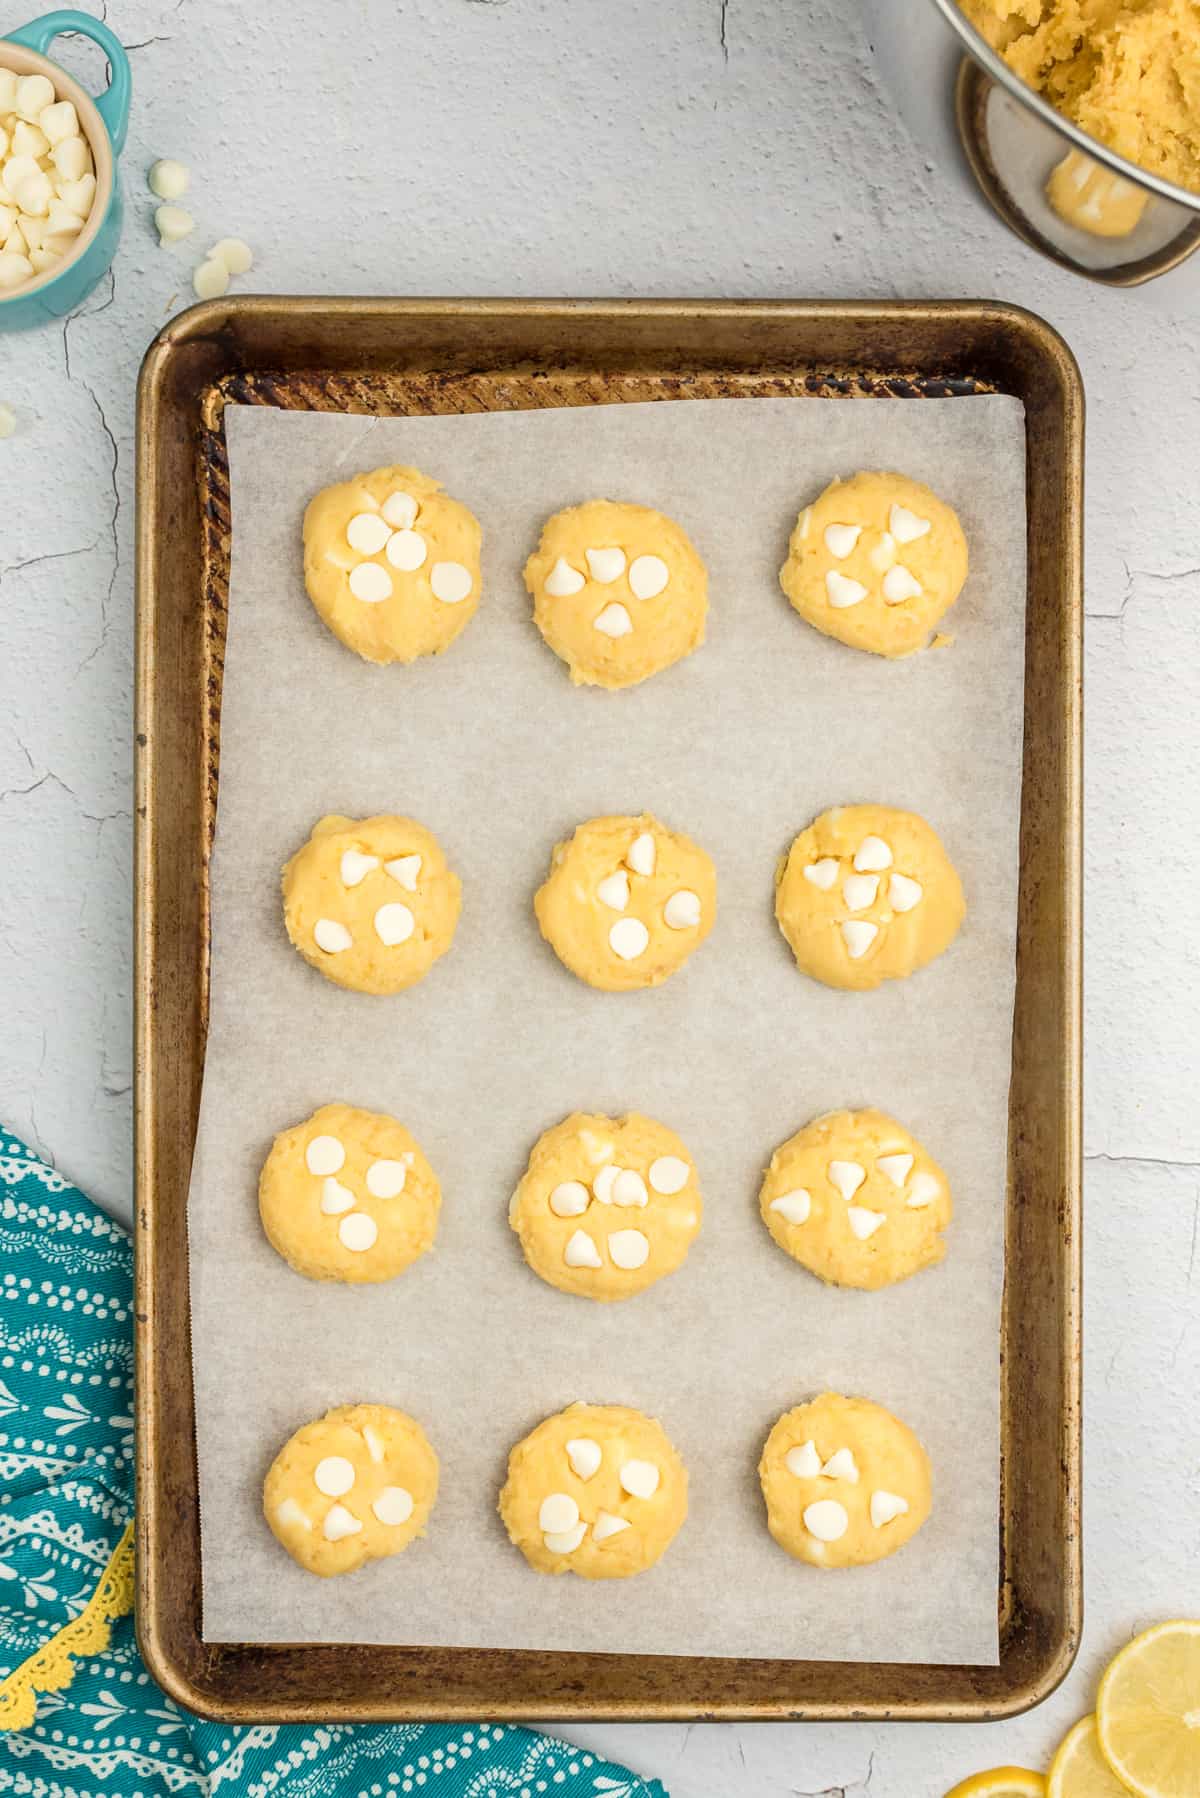 Lemon pudding mix cookie dough with white chocolate chips on lined baking sheet.